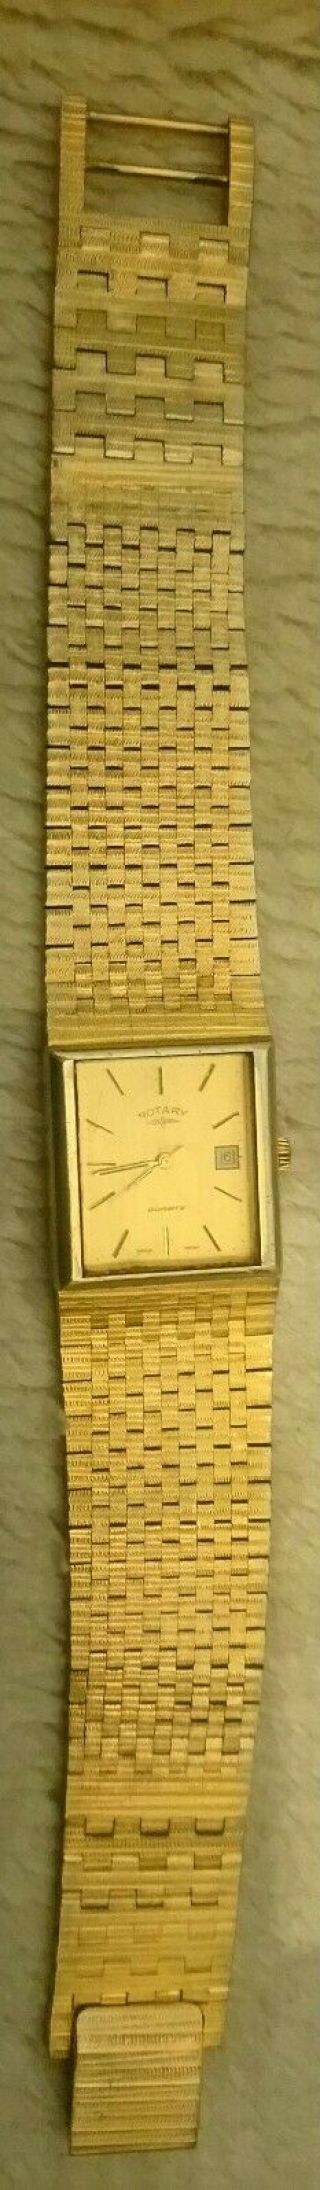 VINTAGE GENTS ROTARY DRESS WATCH WITH DATE AT 3 OCLOCK 3